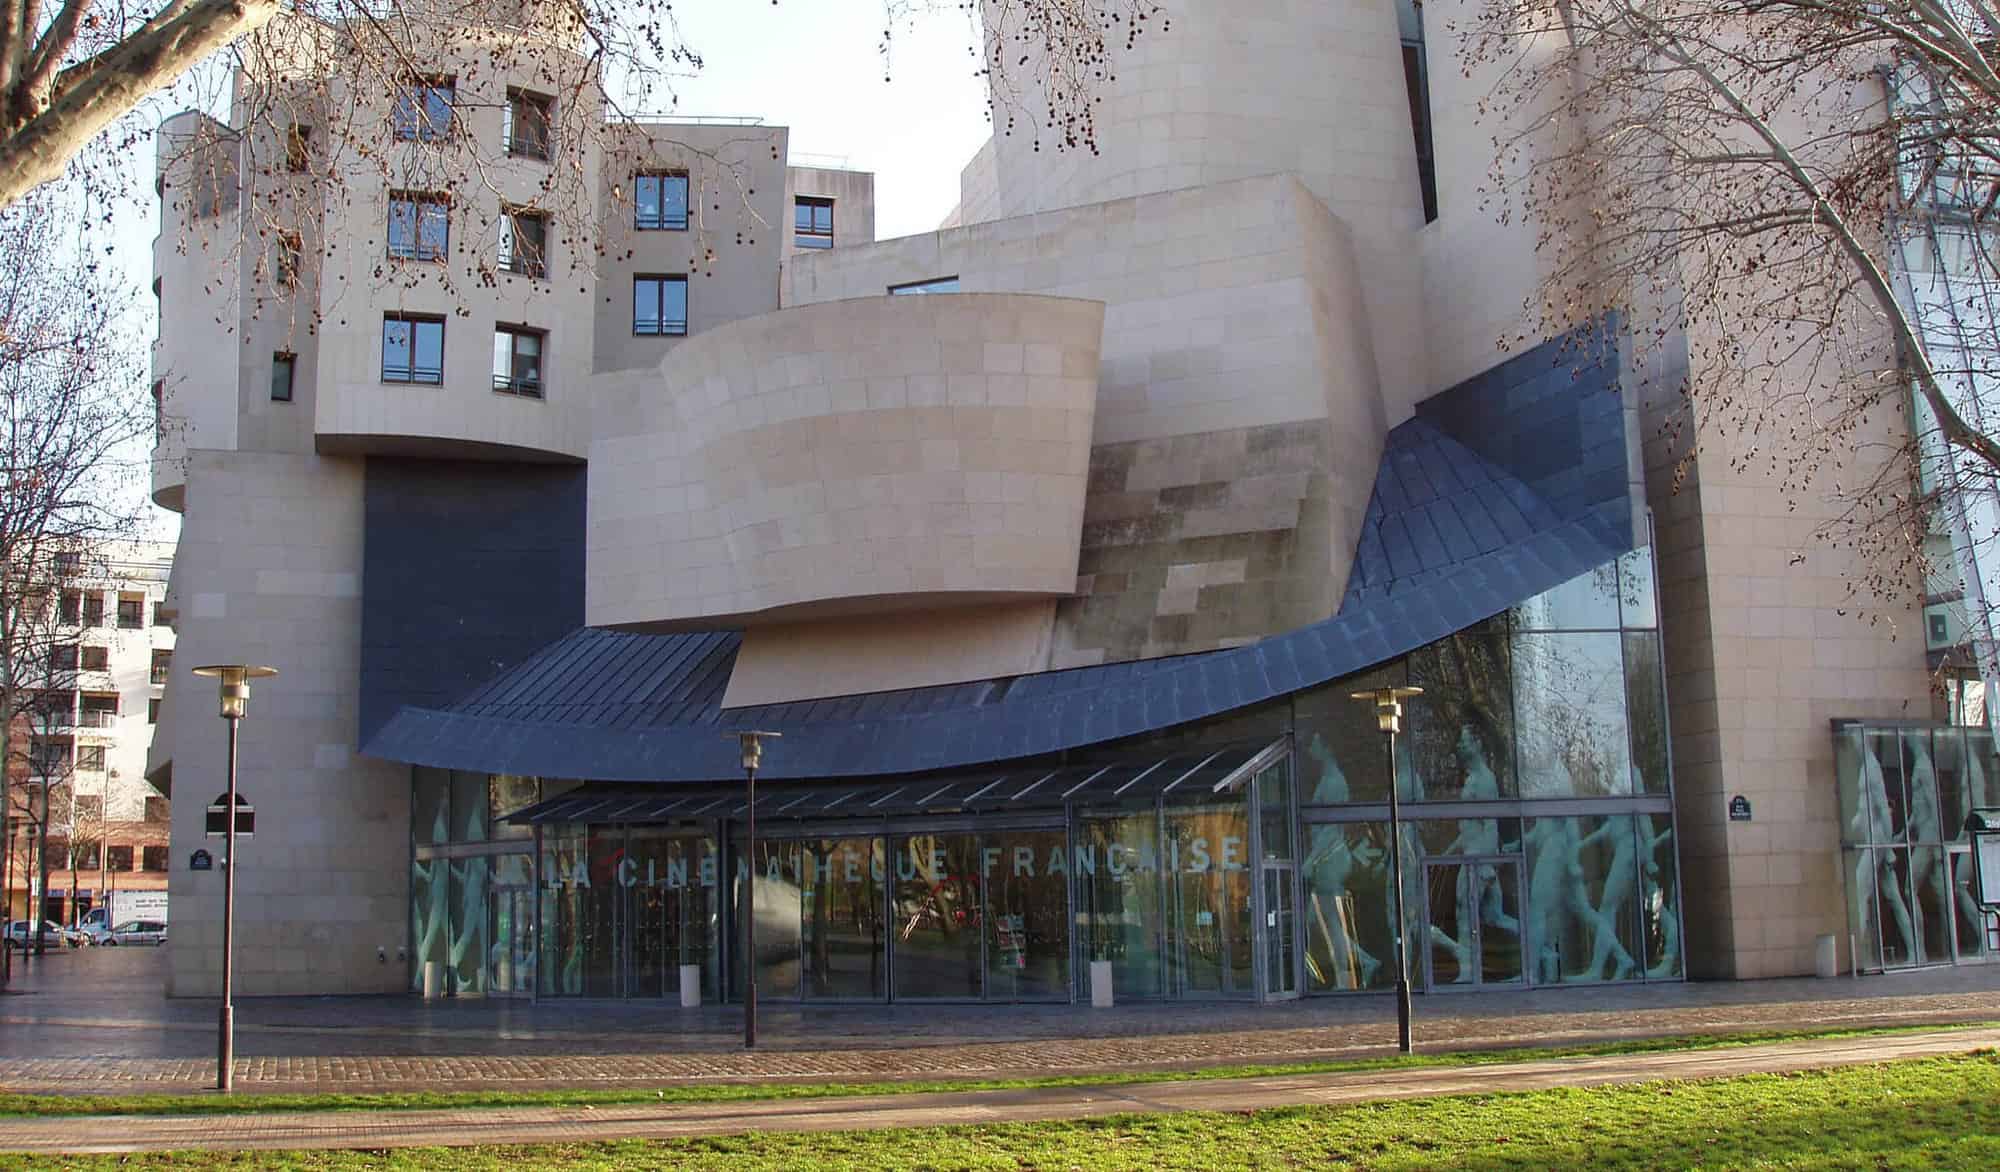 The modern concrete and glass facade of the Cinematheque Francaise in Paris.